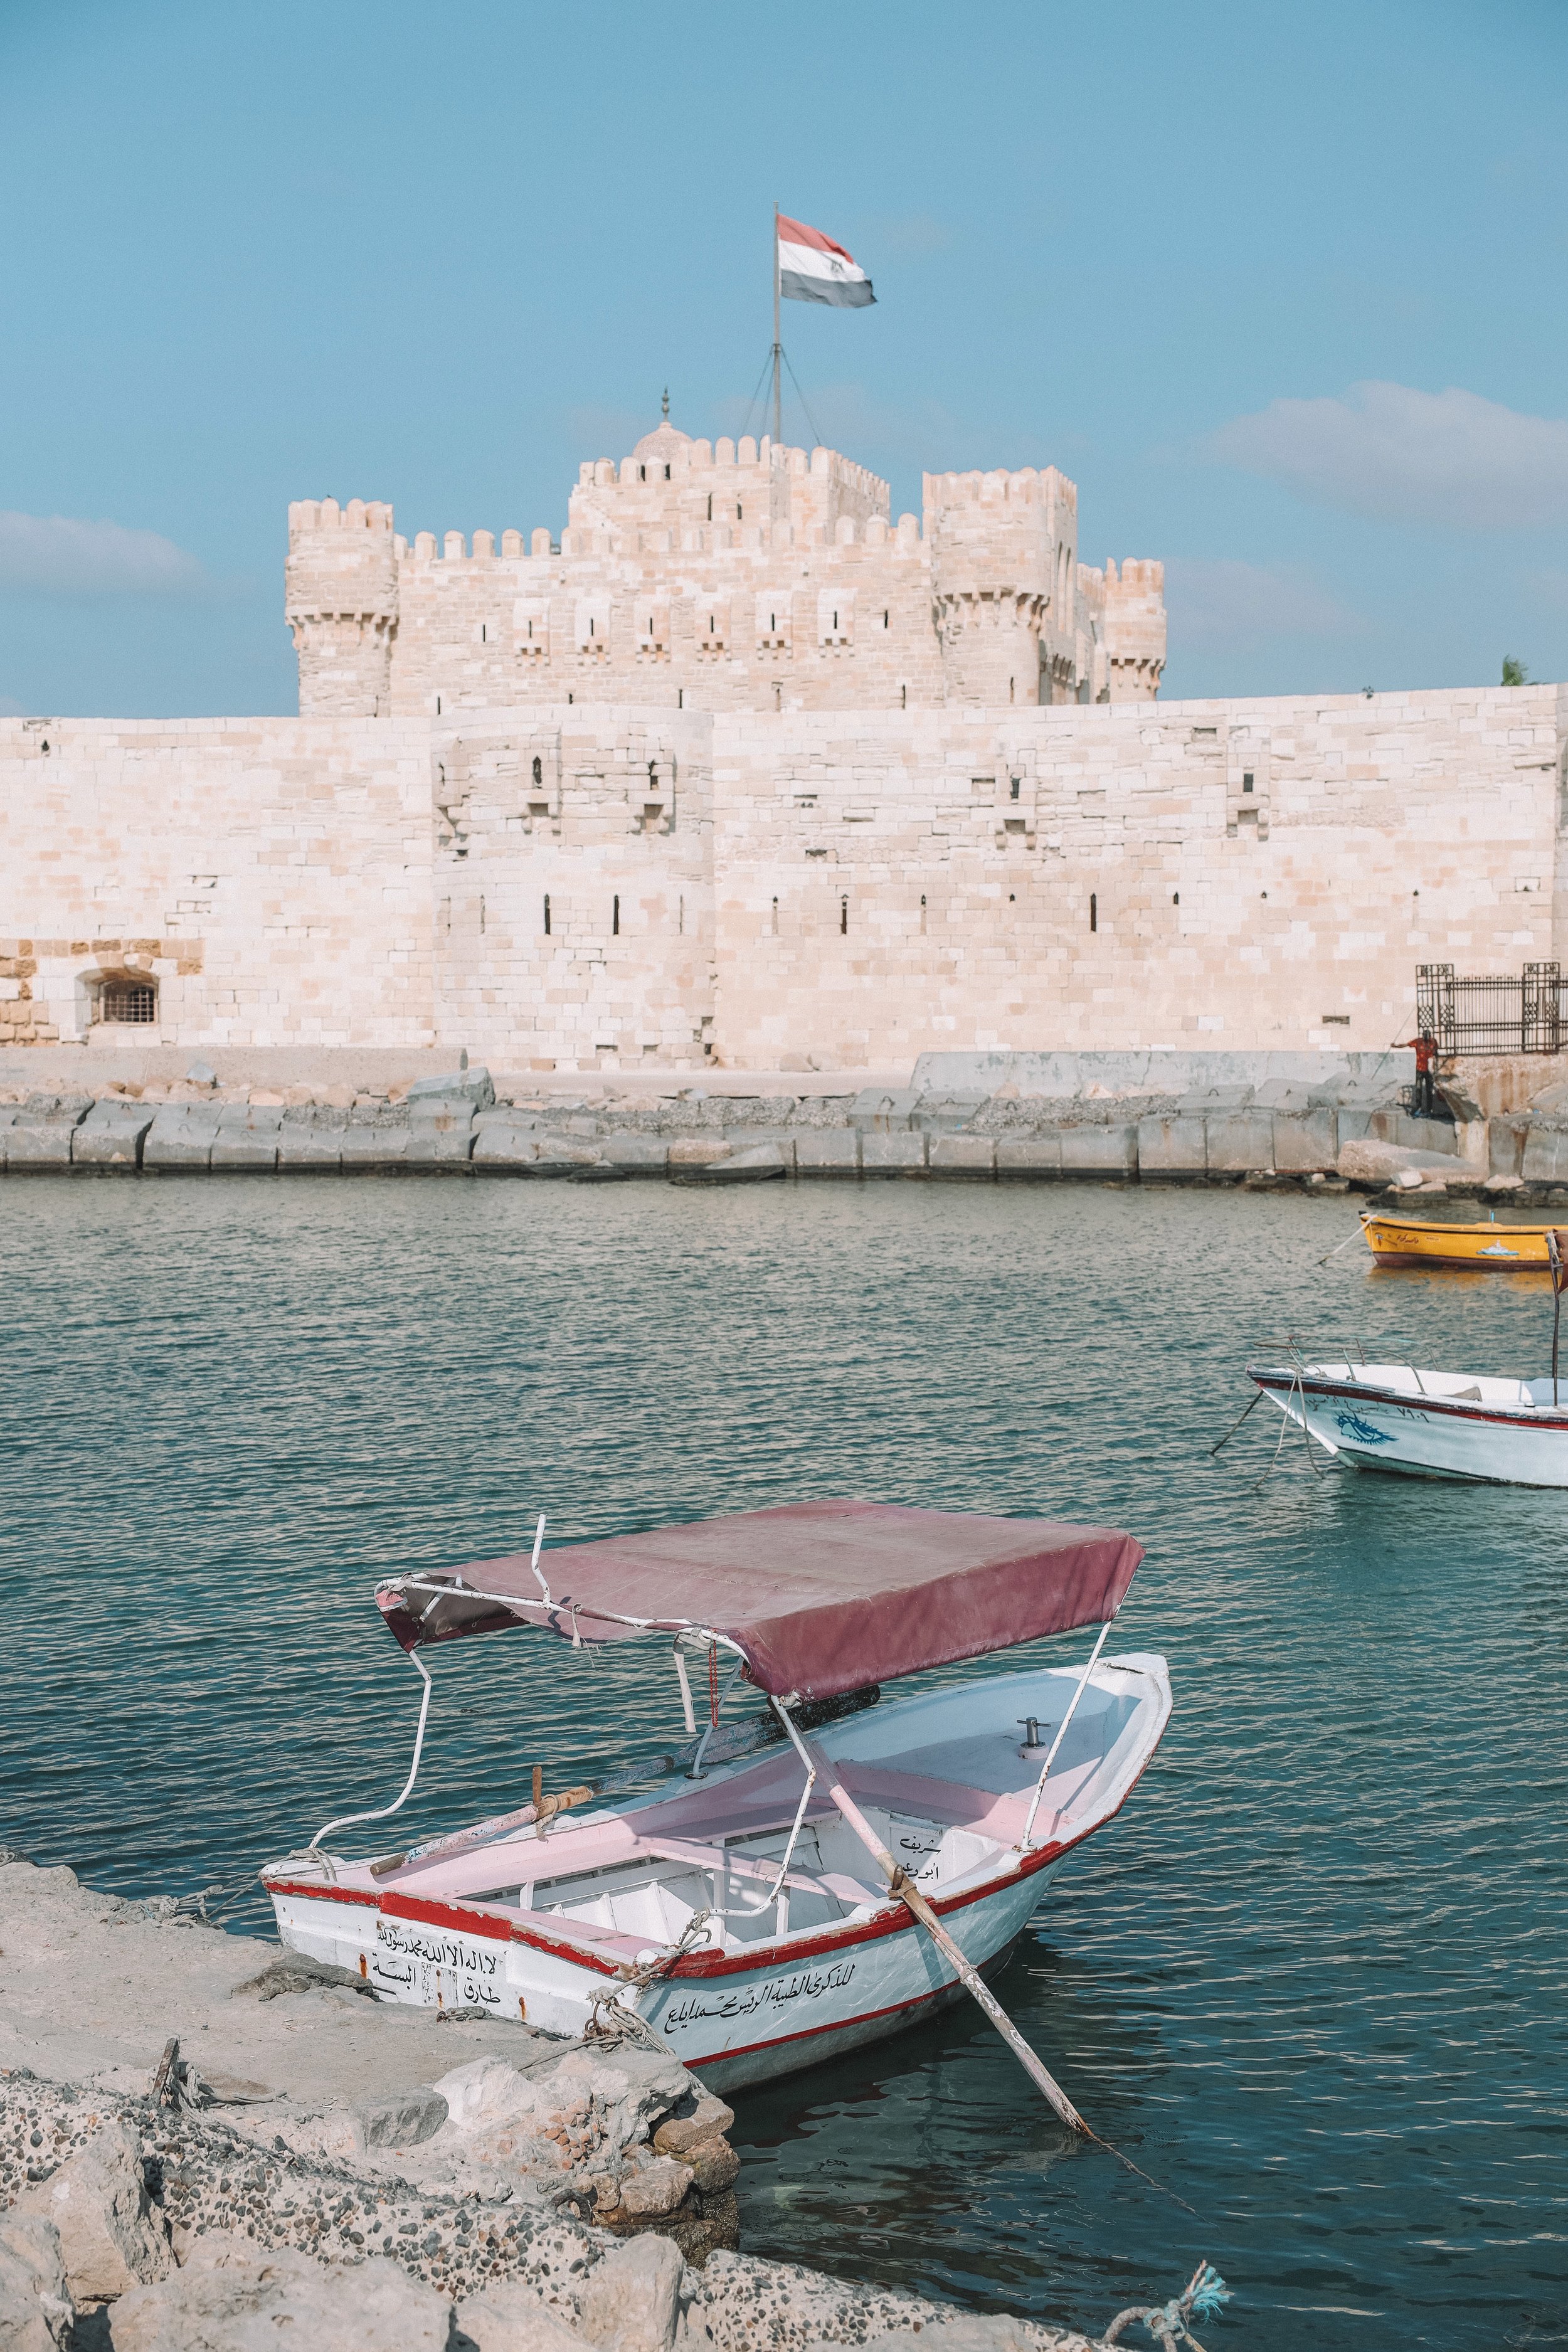 A boat parked in front of the citadel - Citadel of Qaitbay - Alexandria - Egypt